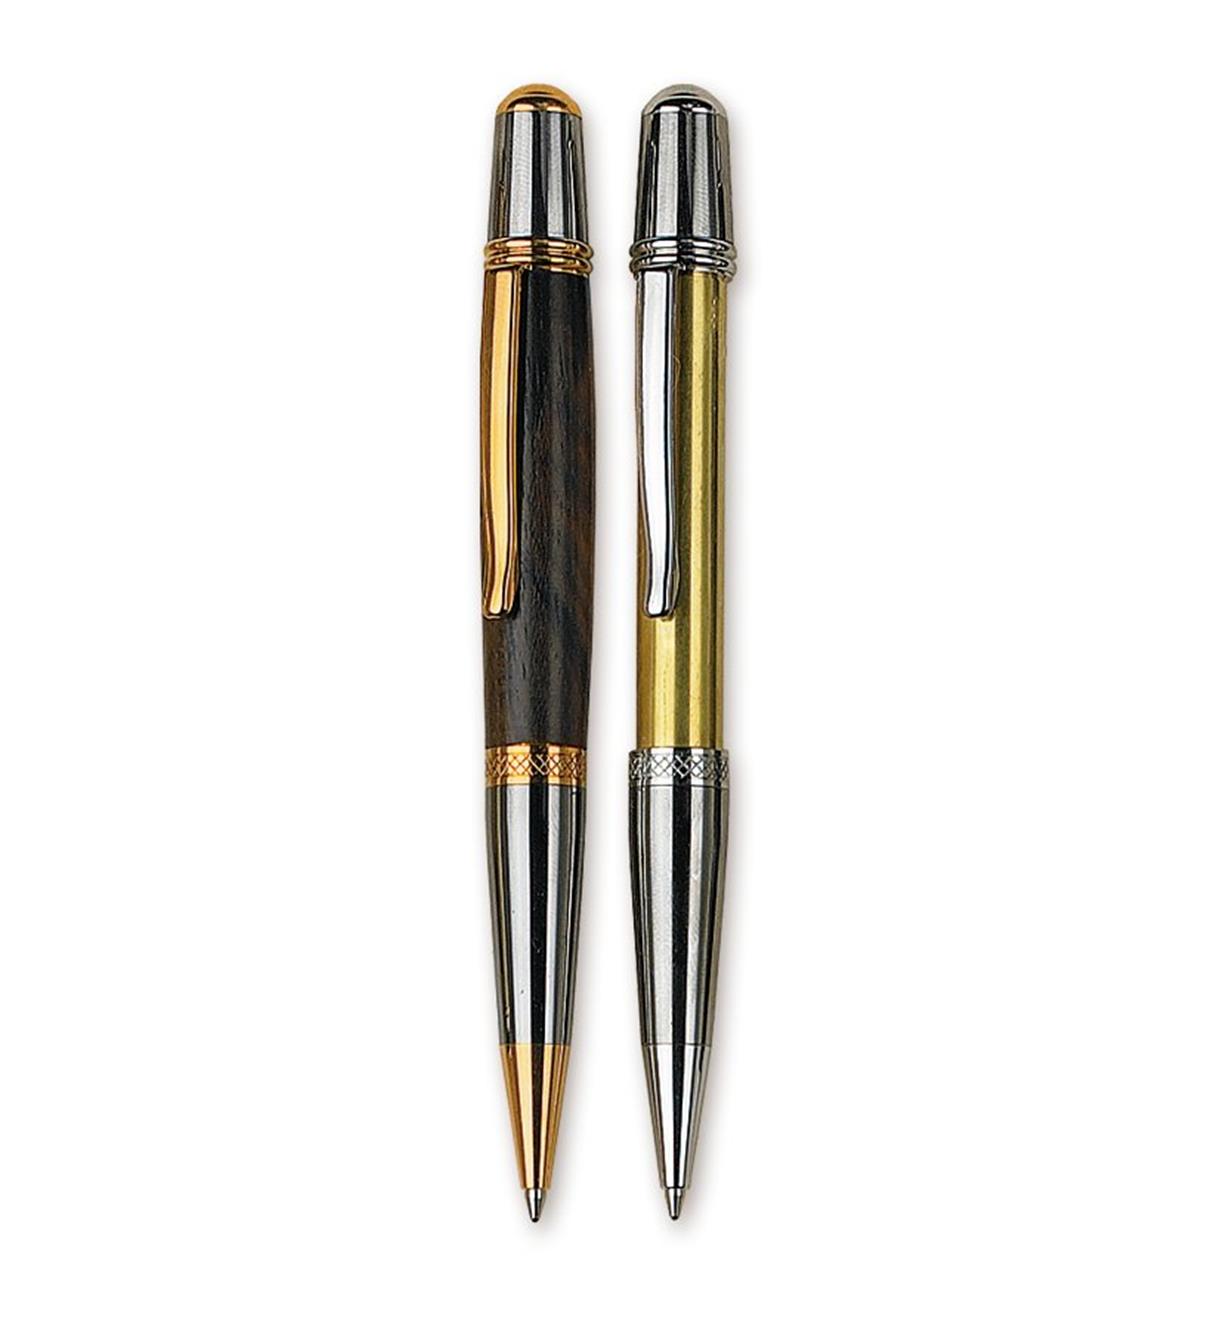 Example of completed Sierra two-toned pen beside pen hardware